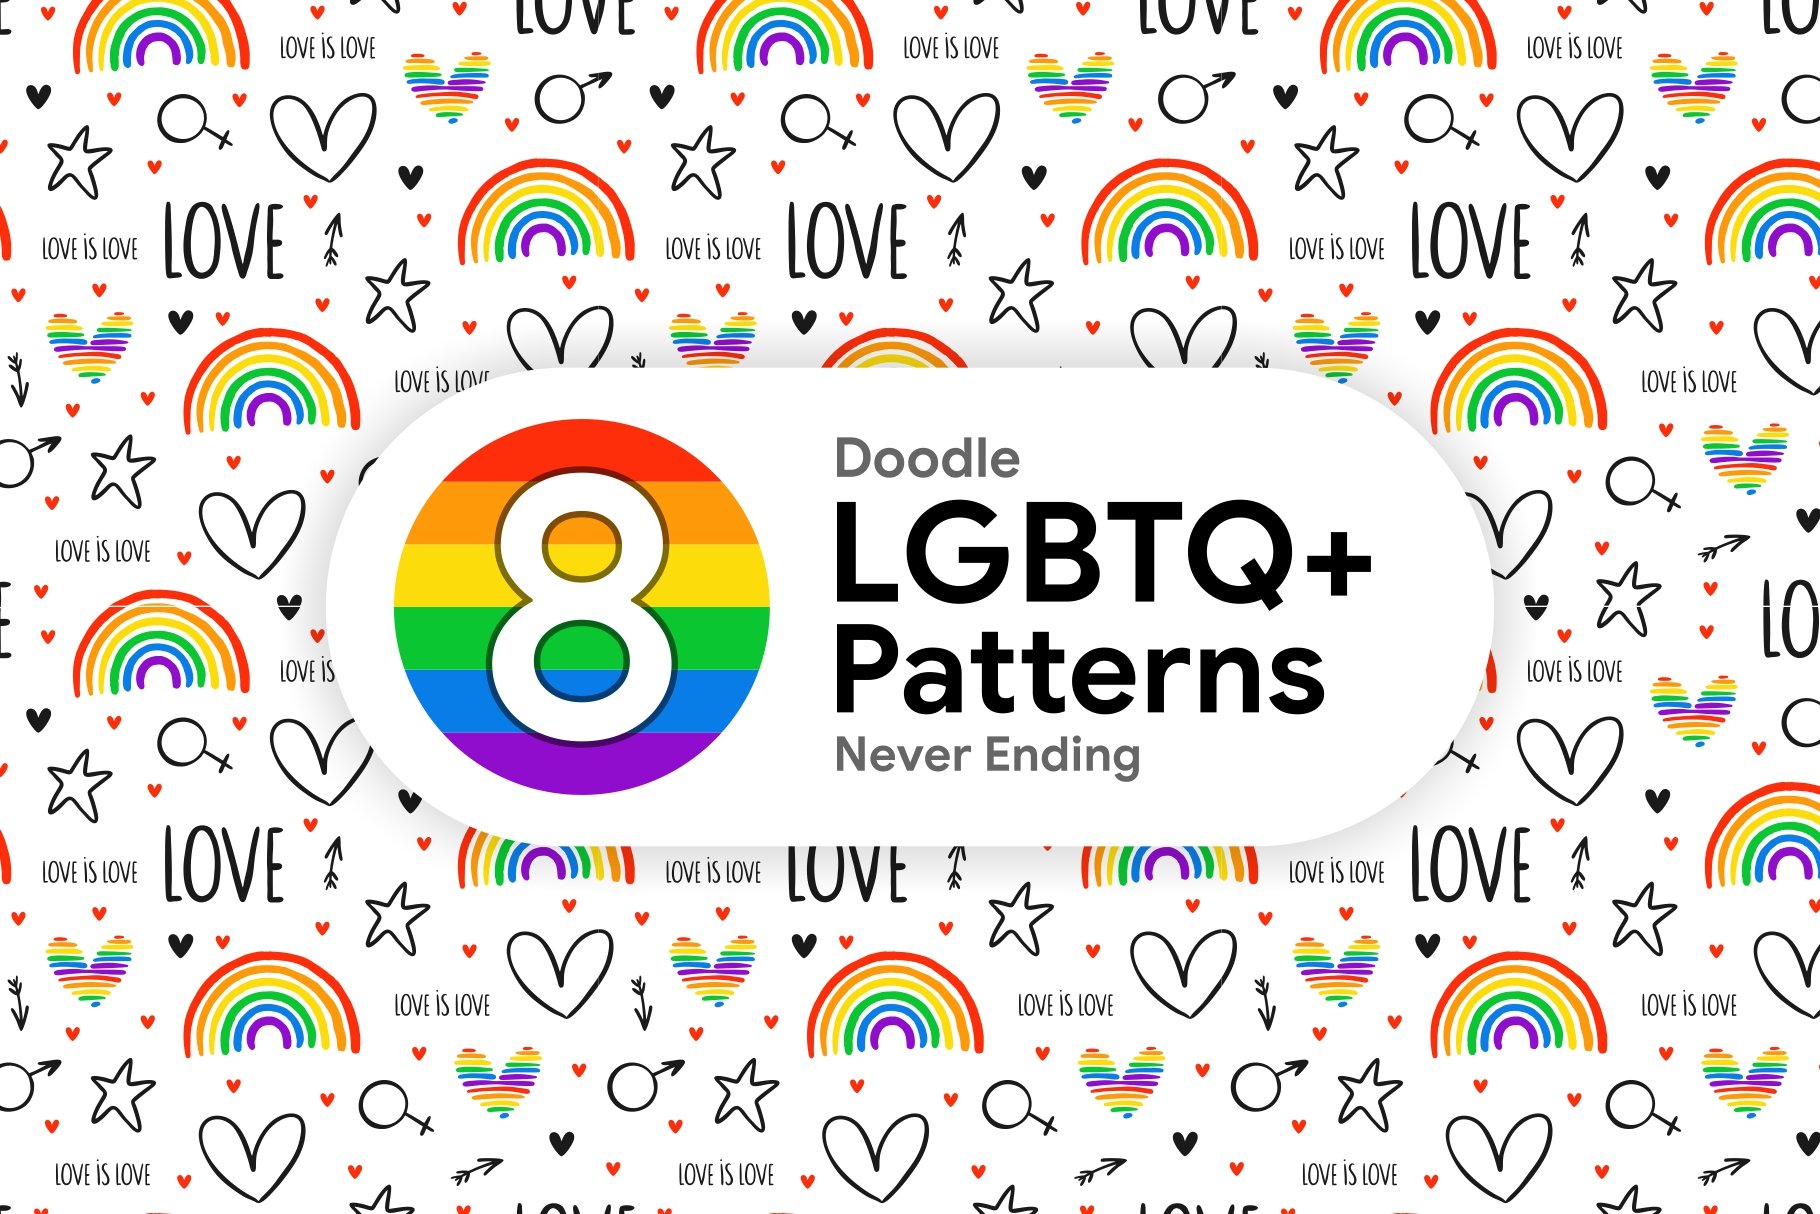 8 LGBTQ+ Never Ending Patterns cover image.